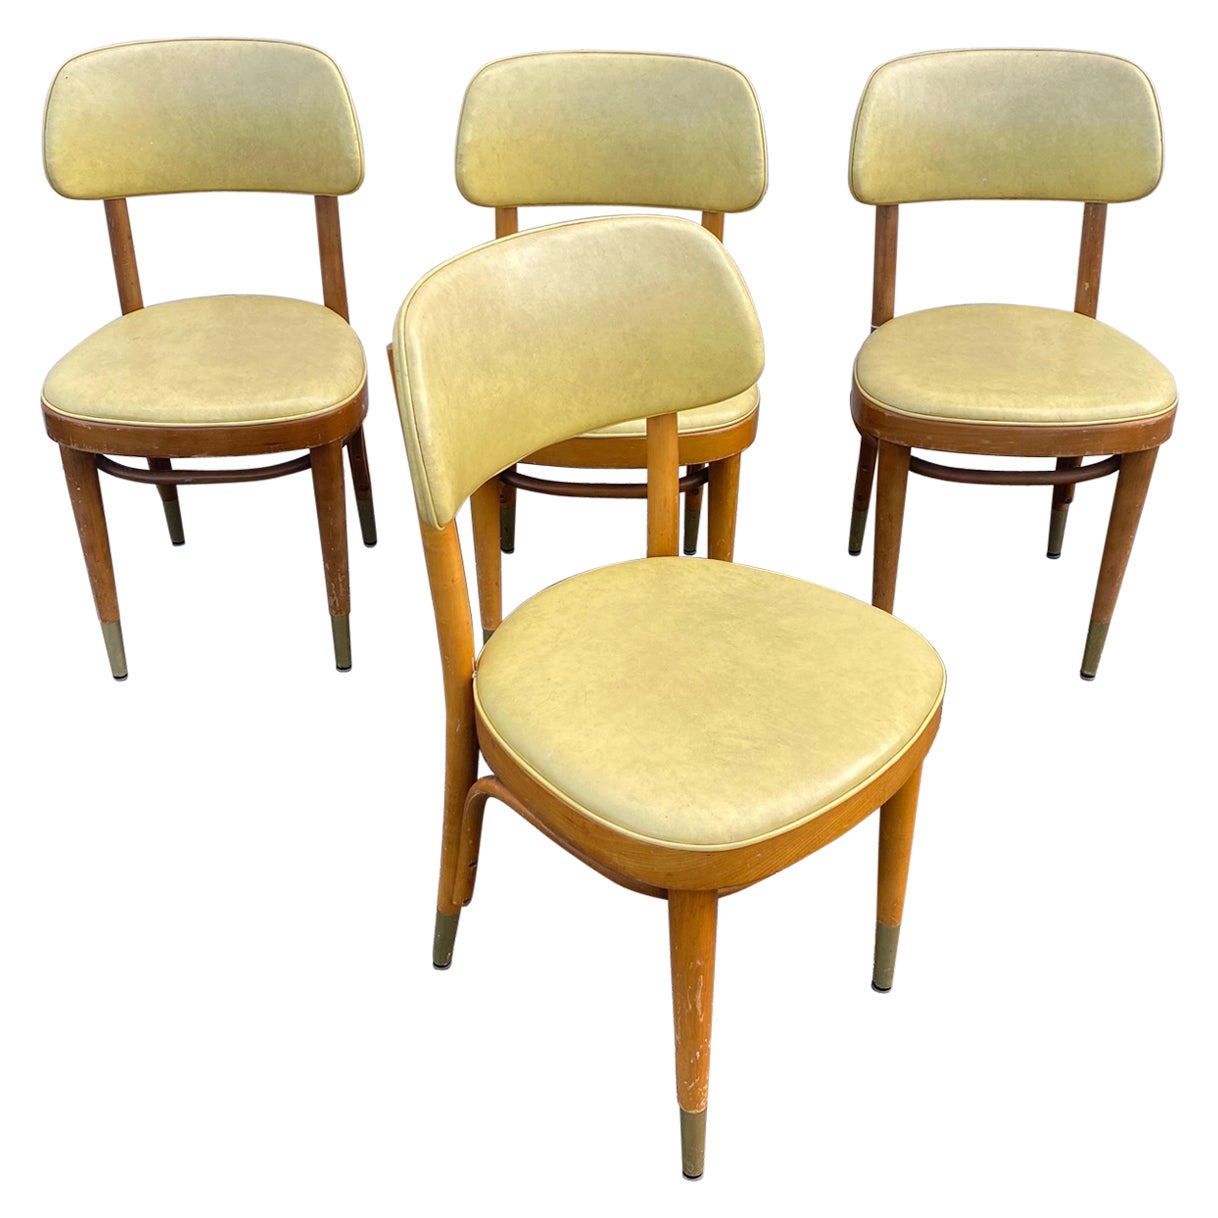 1960s Thonet Bentwood Dining Chairs with Yellow Upholstery